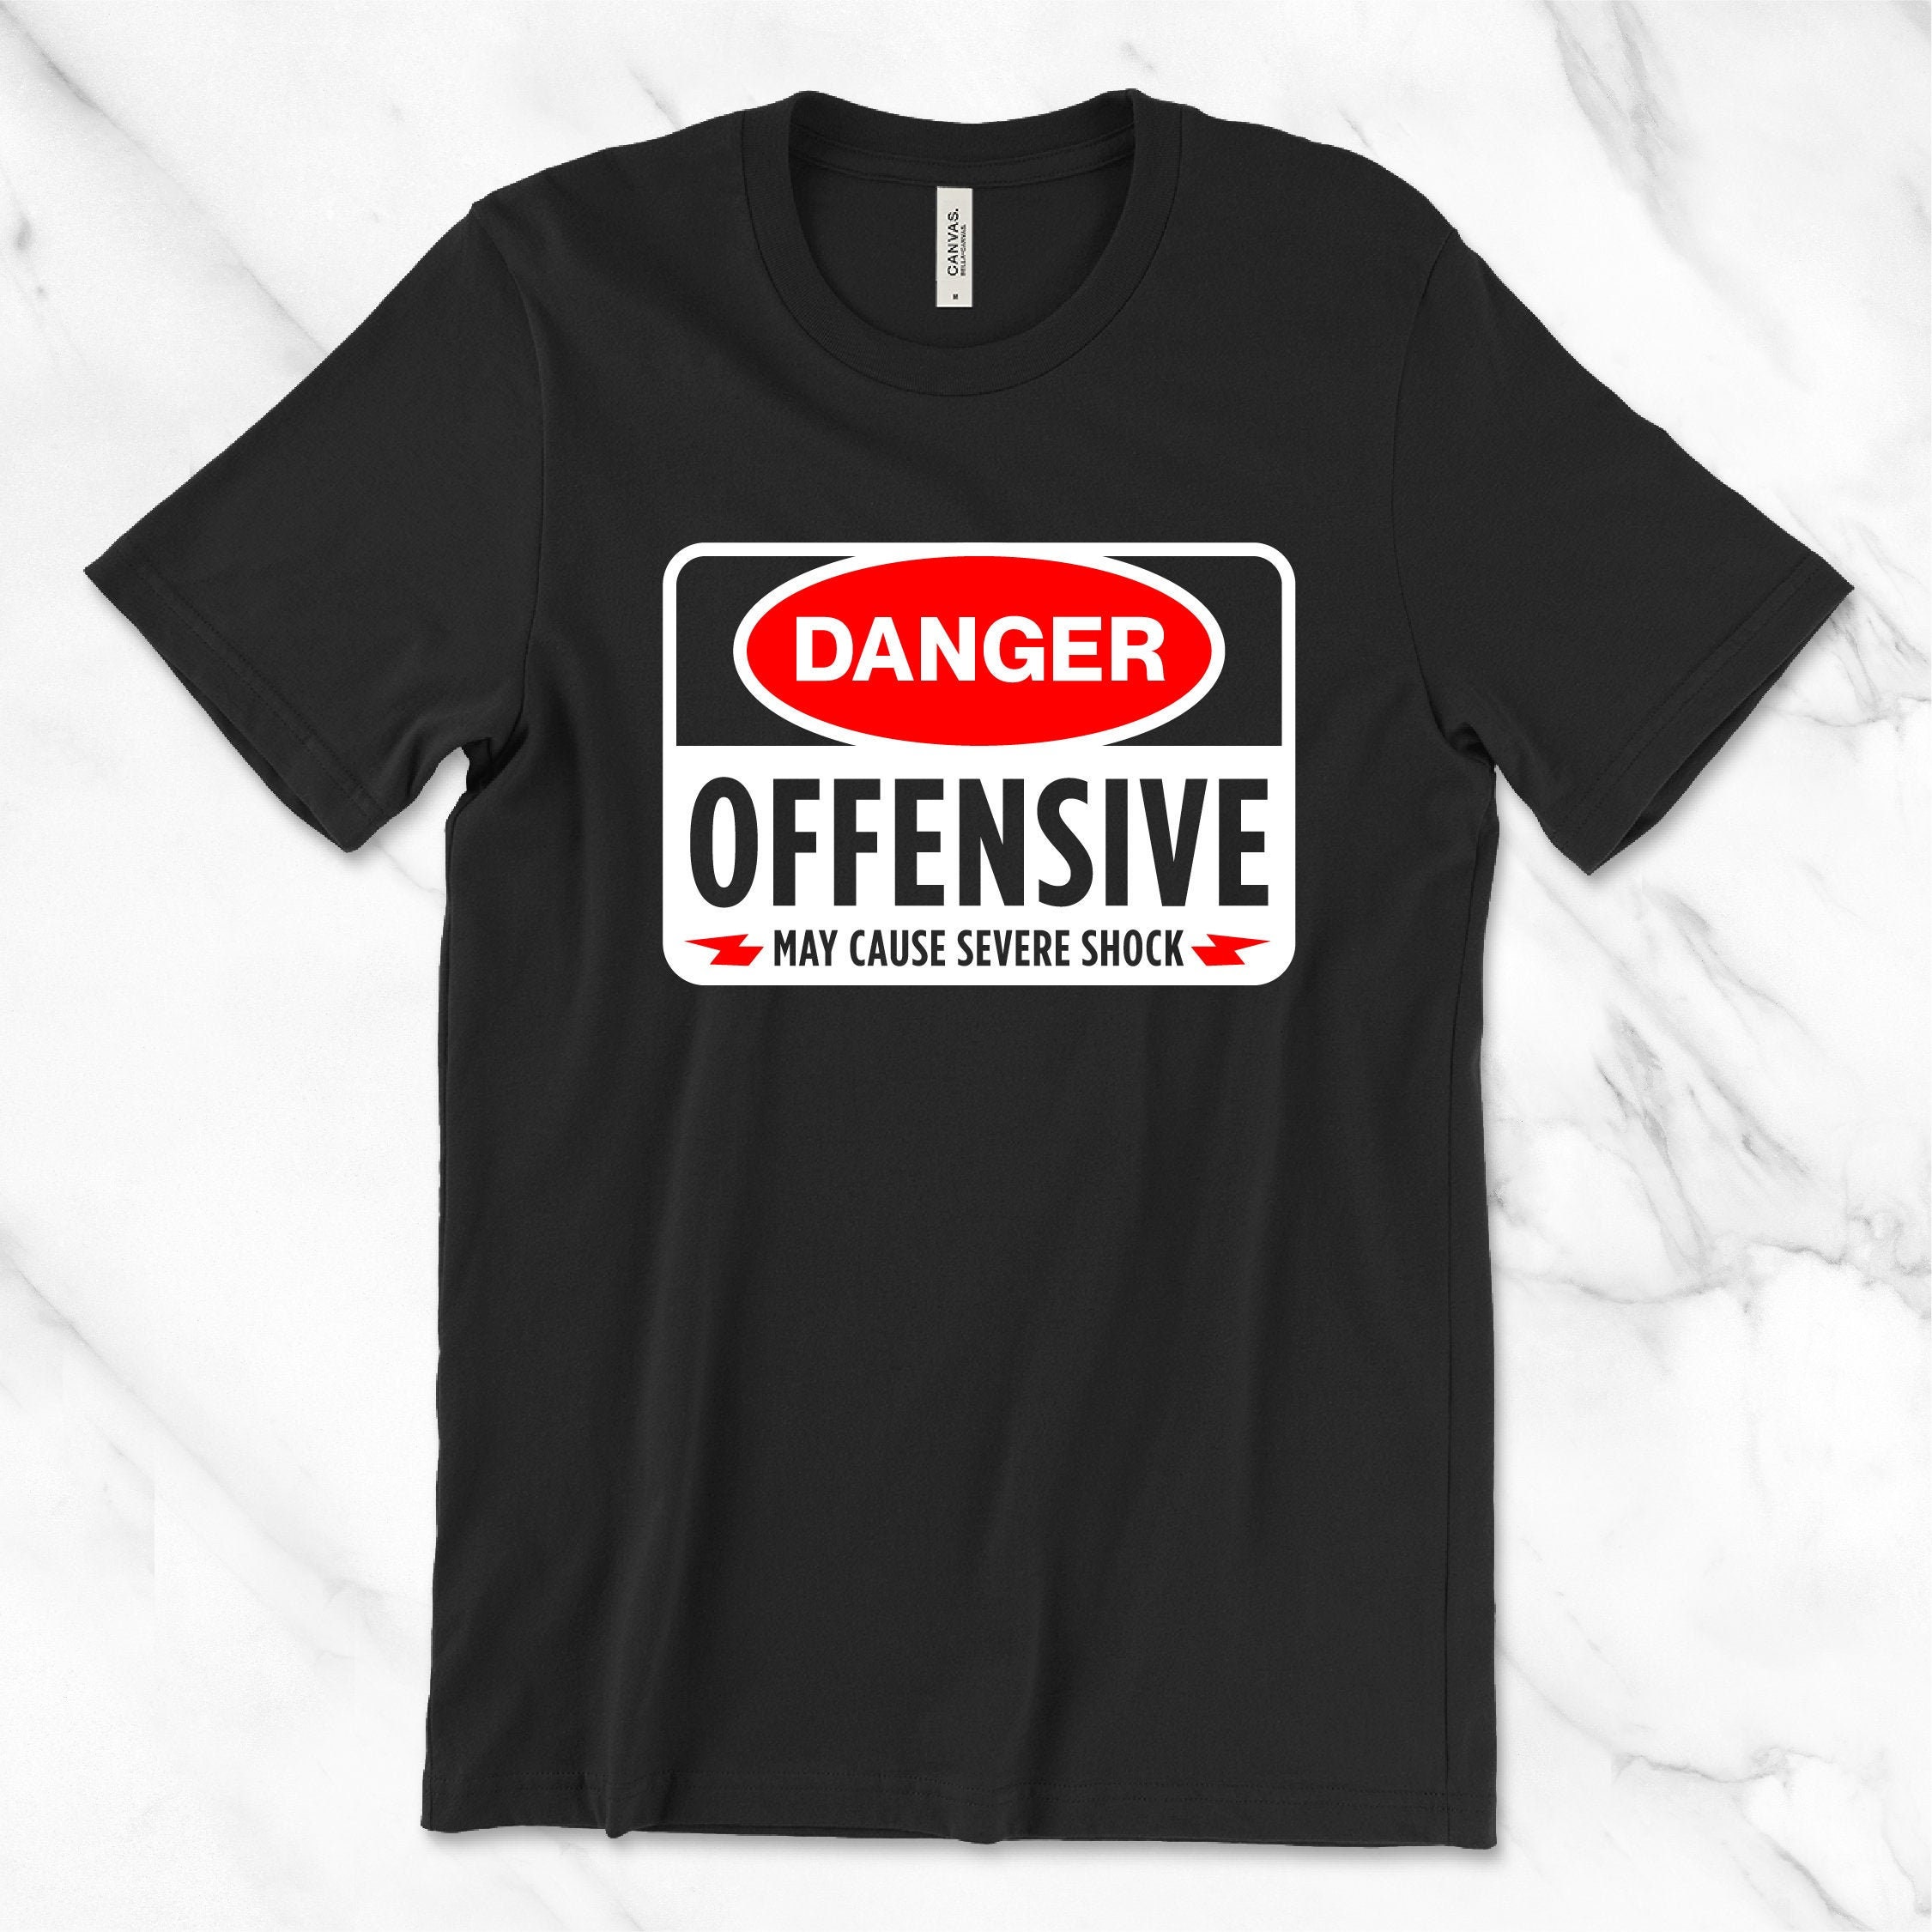 Danger Offensive T Shirts Political Popular Right Now Shirt Etsy